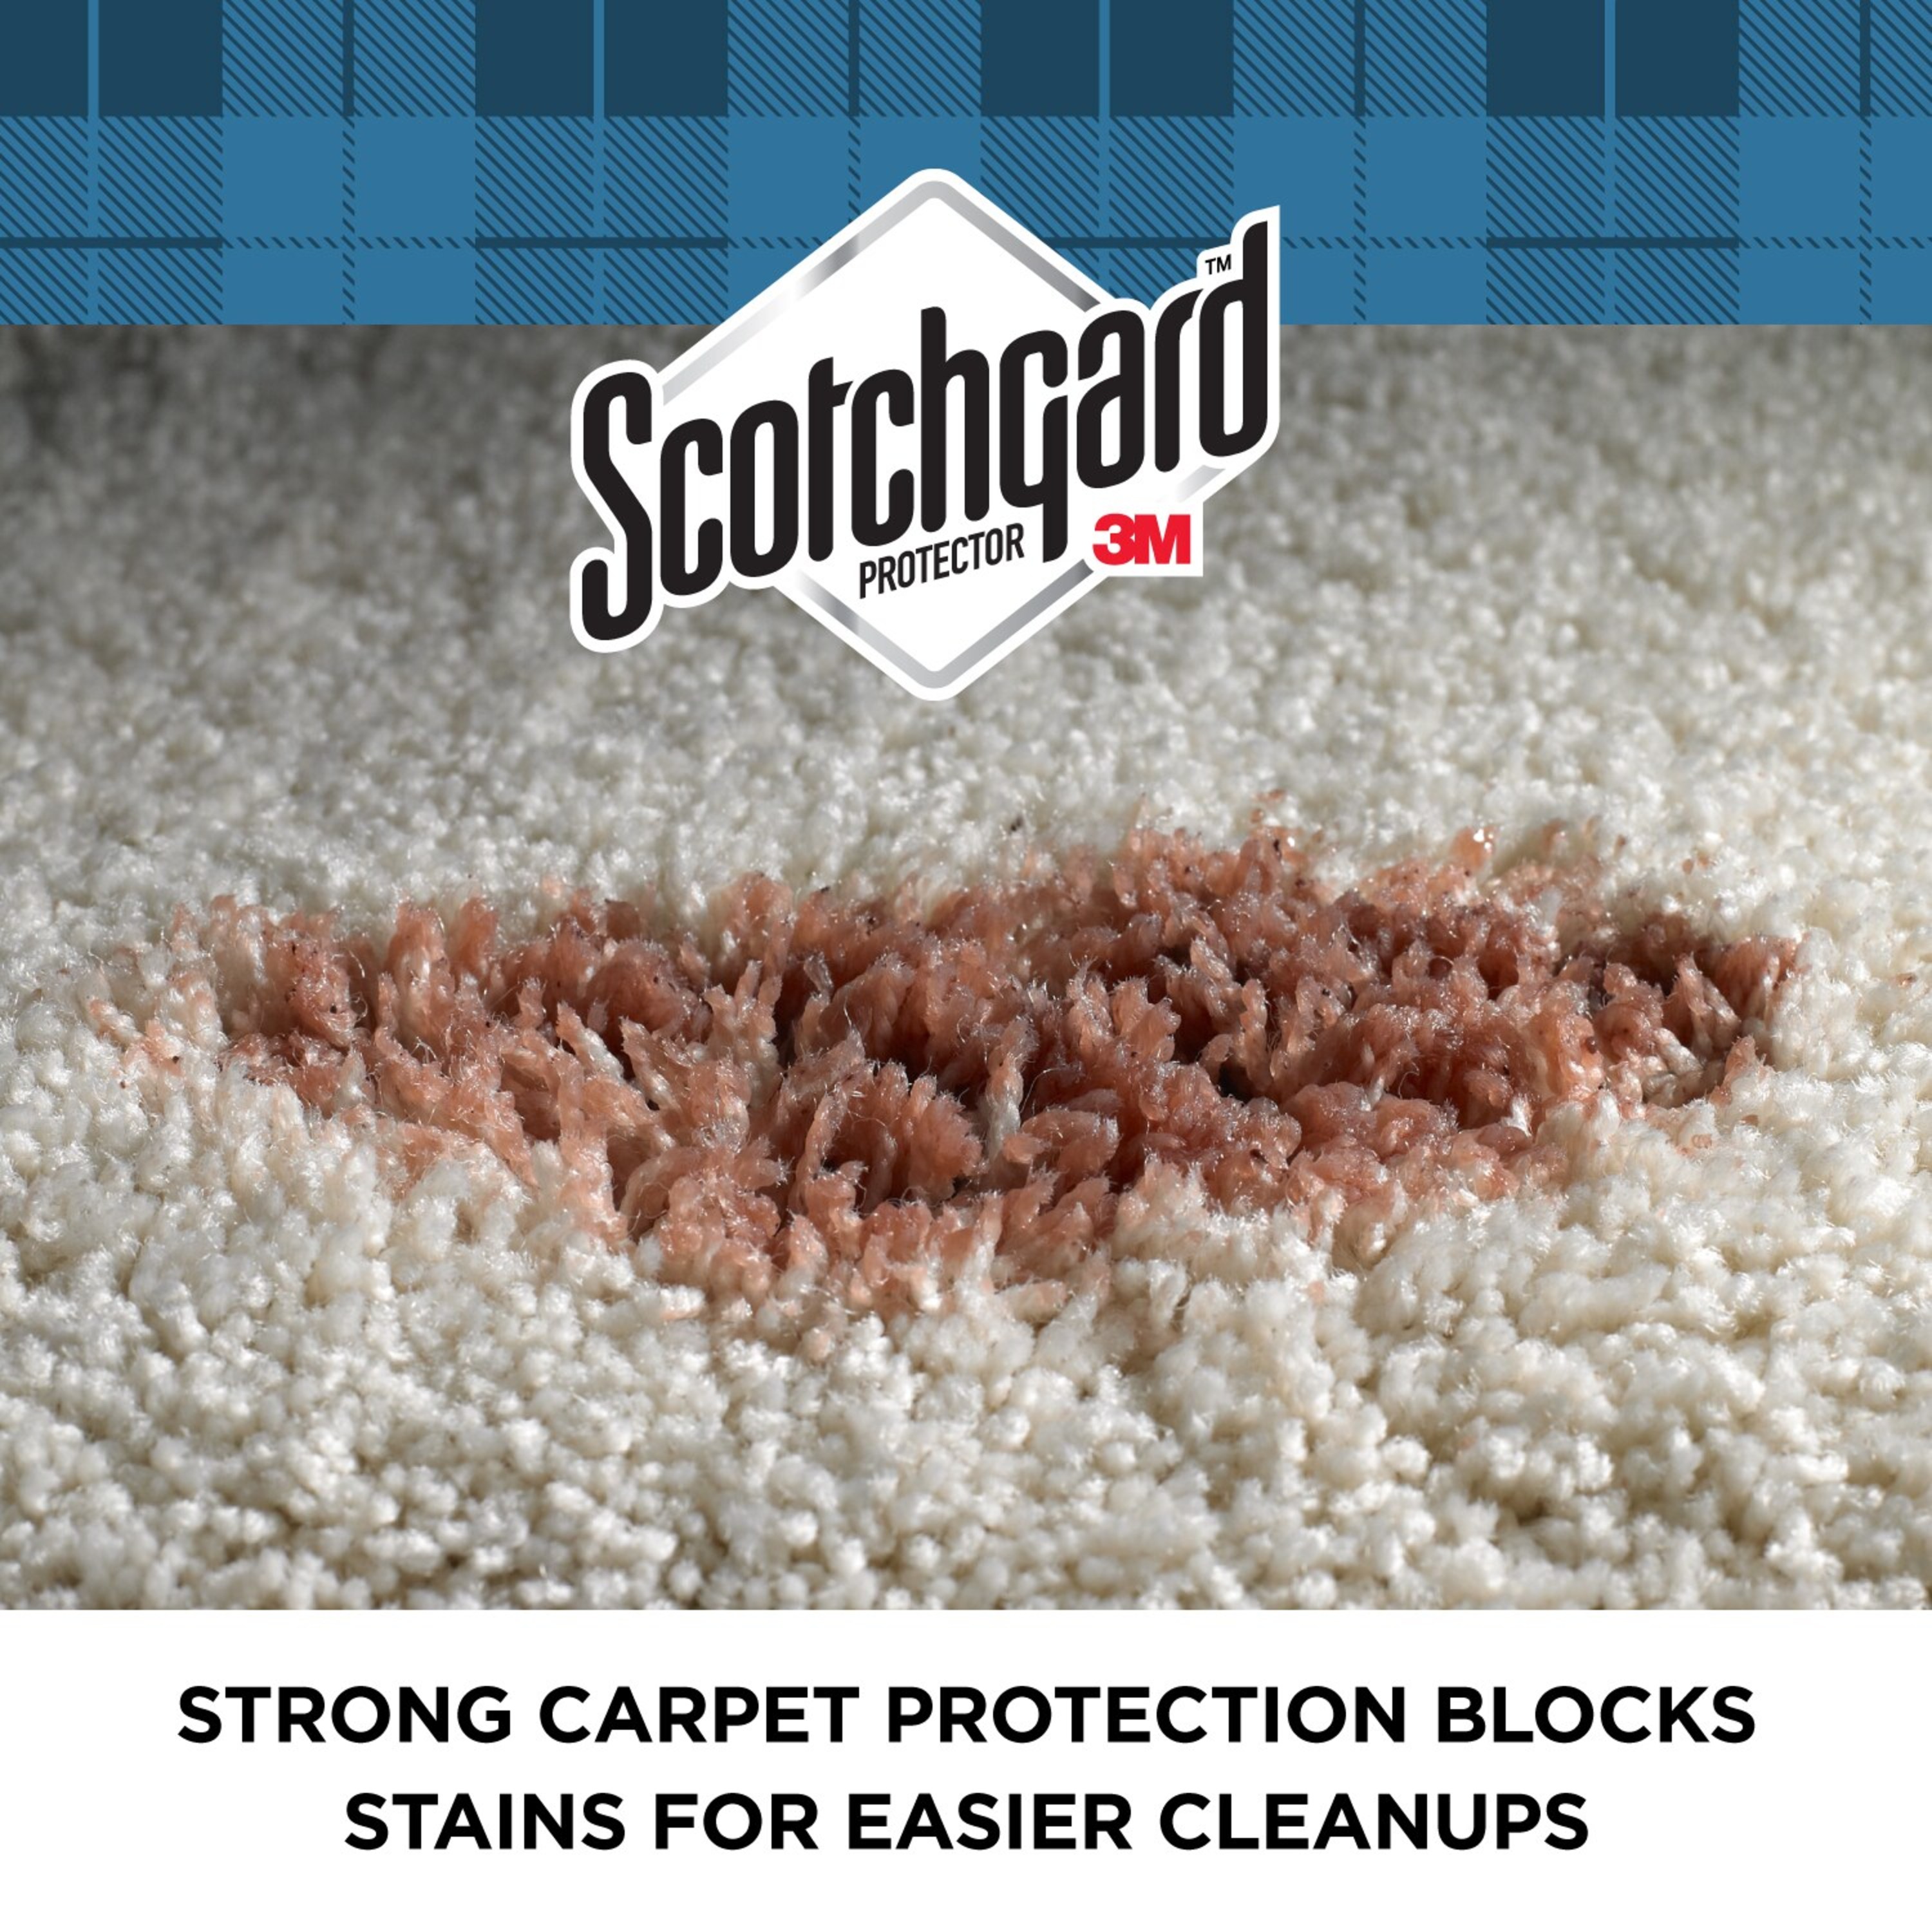 Scotchgard Fabric & Upholstery Protector, Repels Liquids, Blocks Stains, 14  Ounces